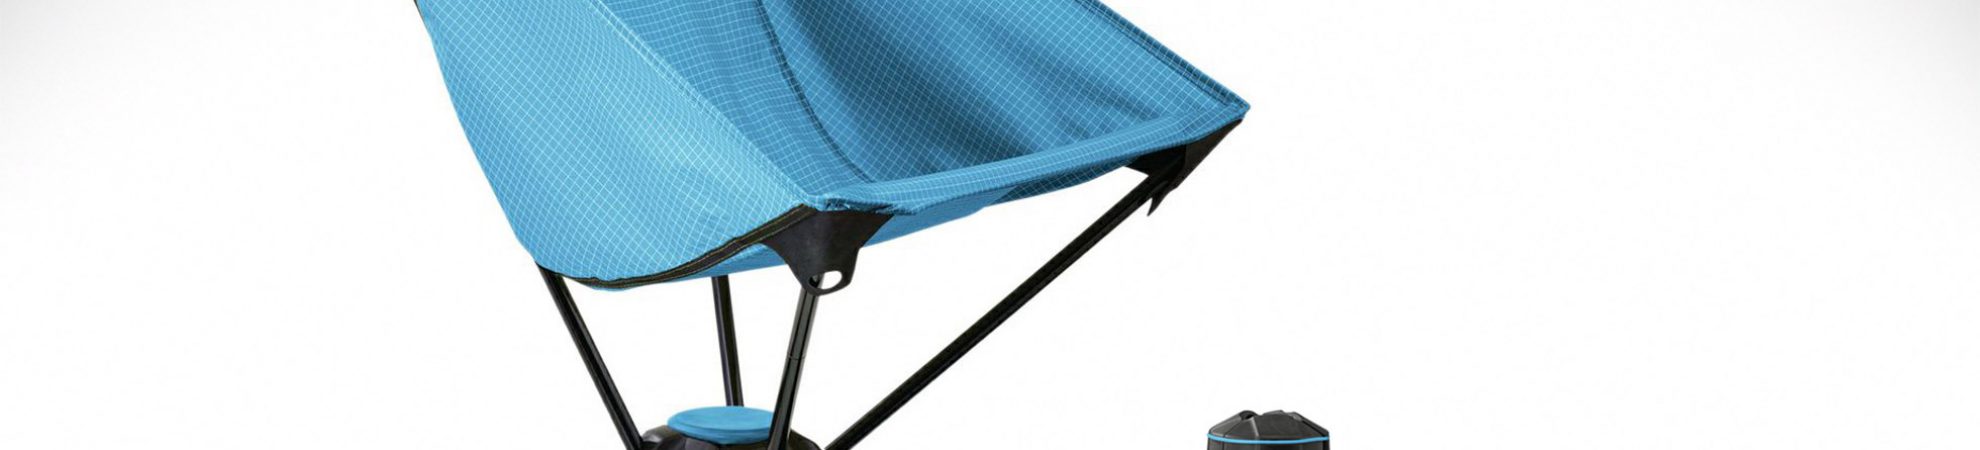 Therm-A-Rest Treo Chair: The Niftiest Camping Chair on the Planet